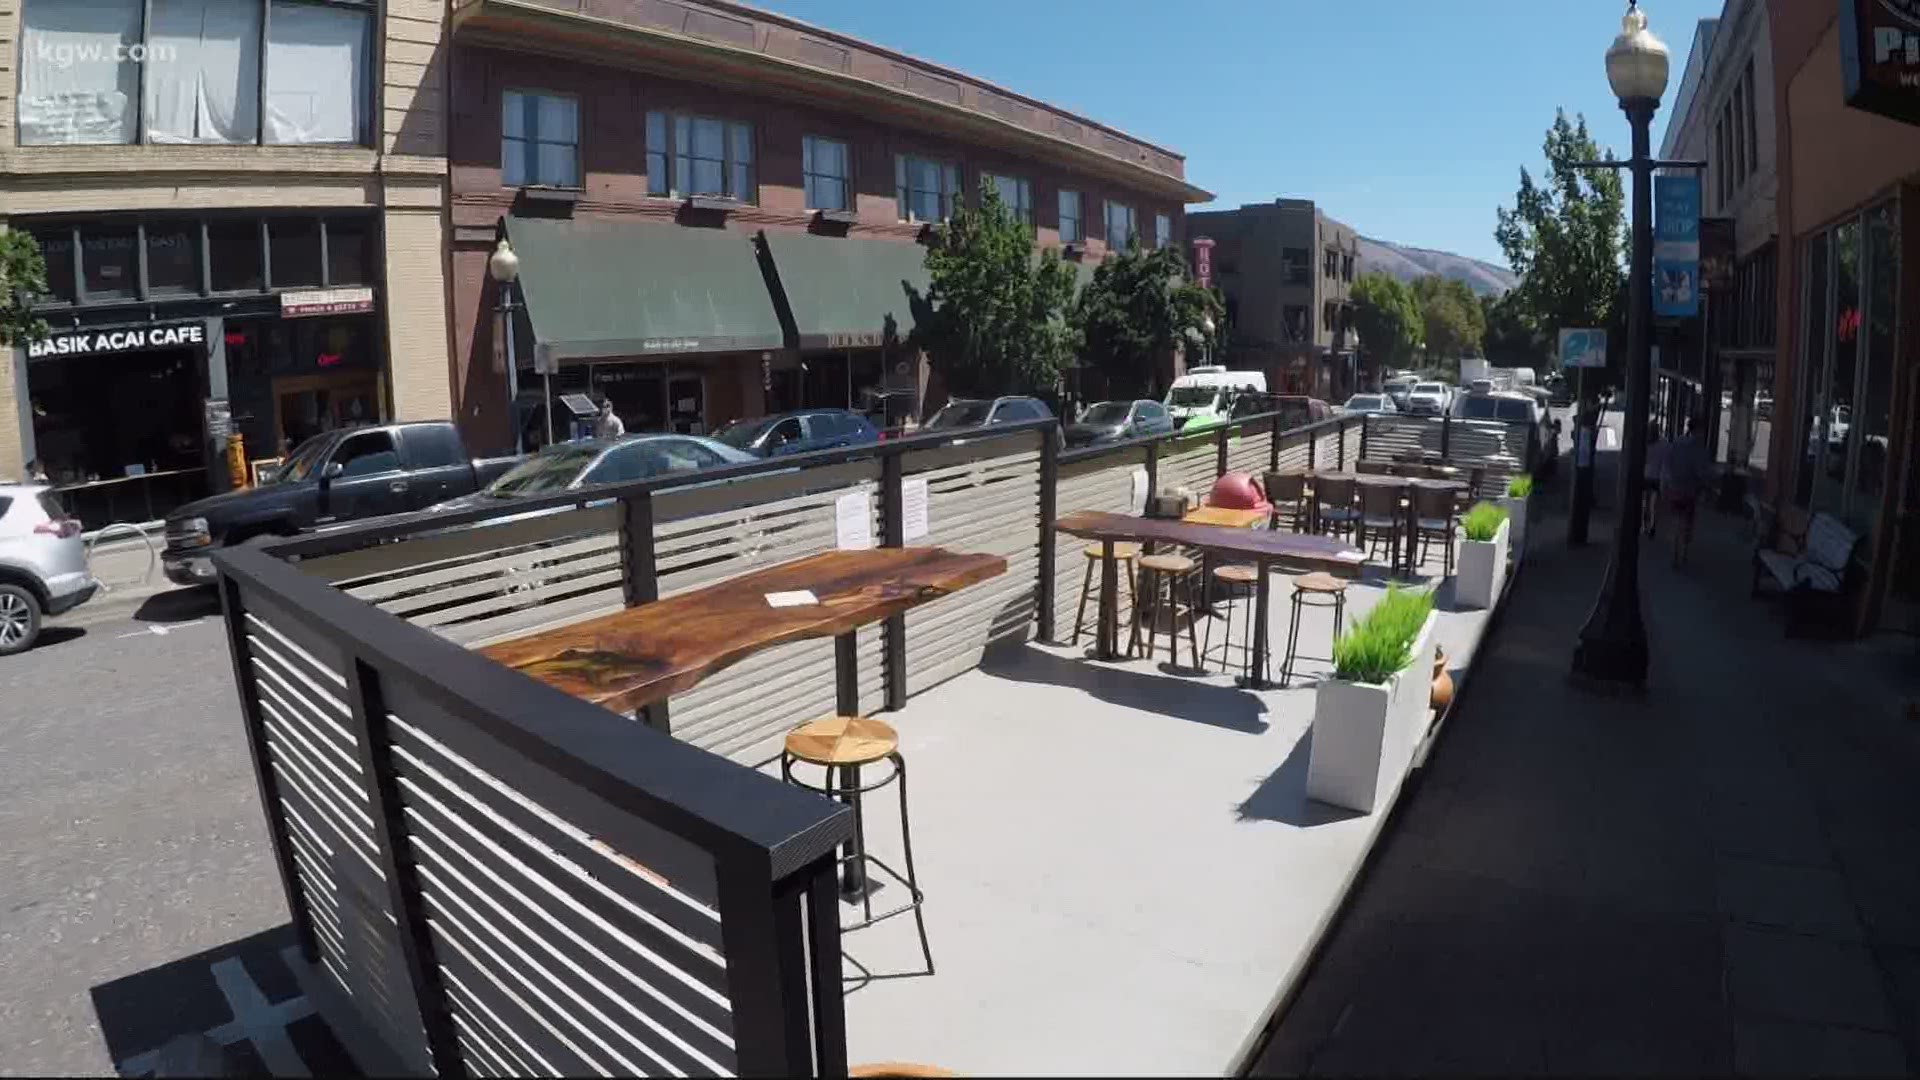 Three businesses along Highway 30 have set up parklets that the Oregon Department of Transportation says need to be reconfigured or removed.